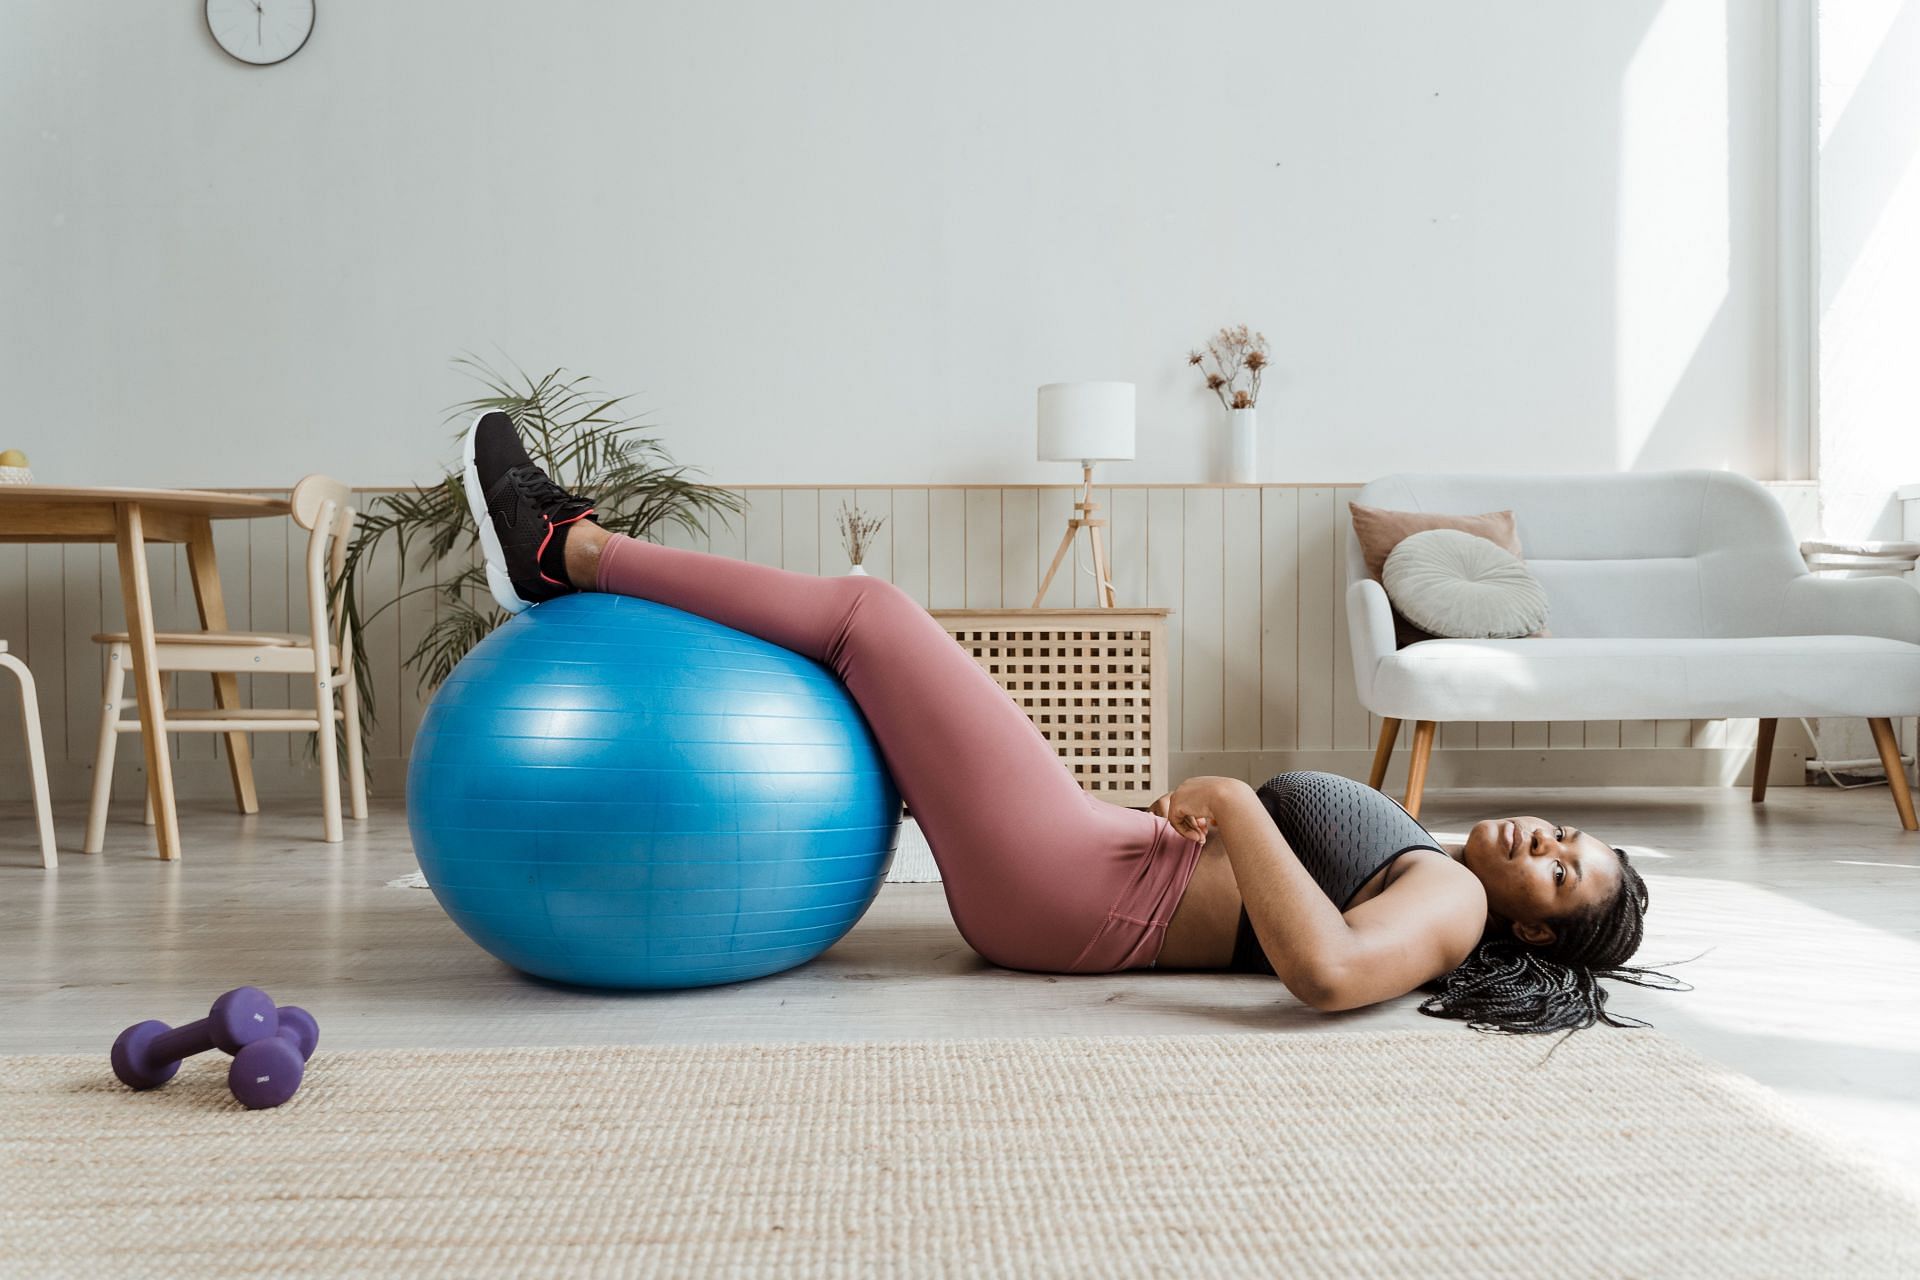 Your body will let you know when it&#039;s time to rest or when you need to adjust to your workout routine. (Photo by MART PRODUCTION/pexels)